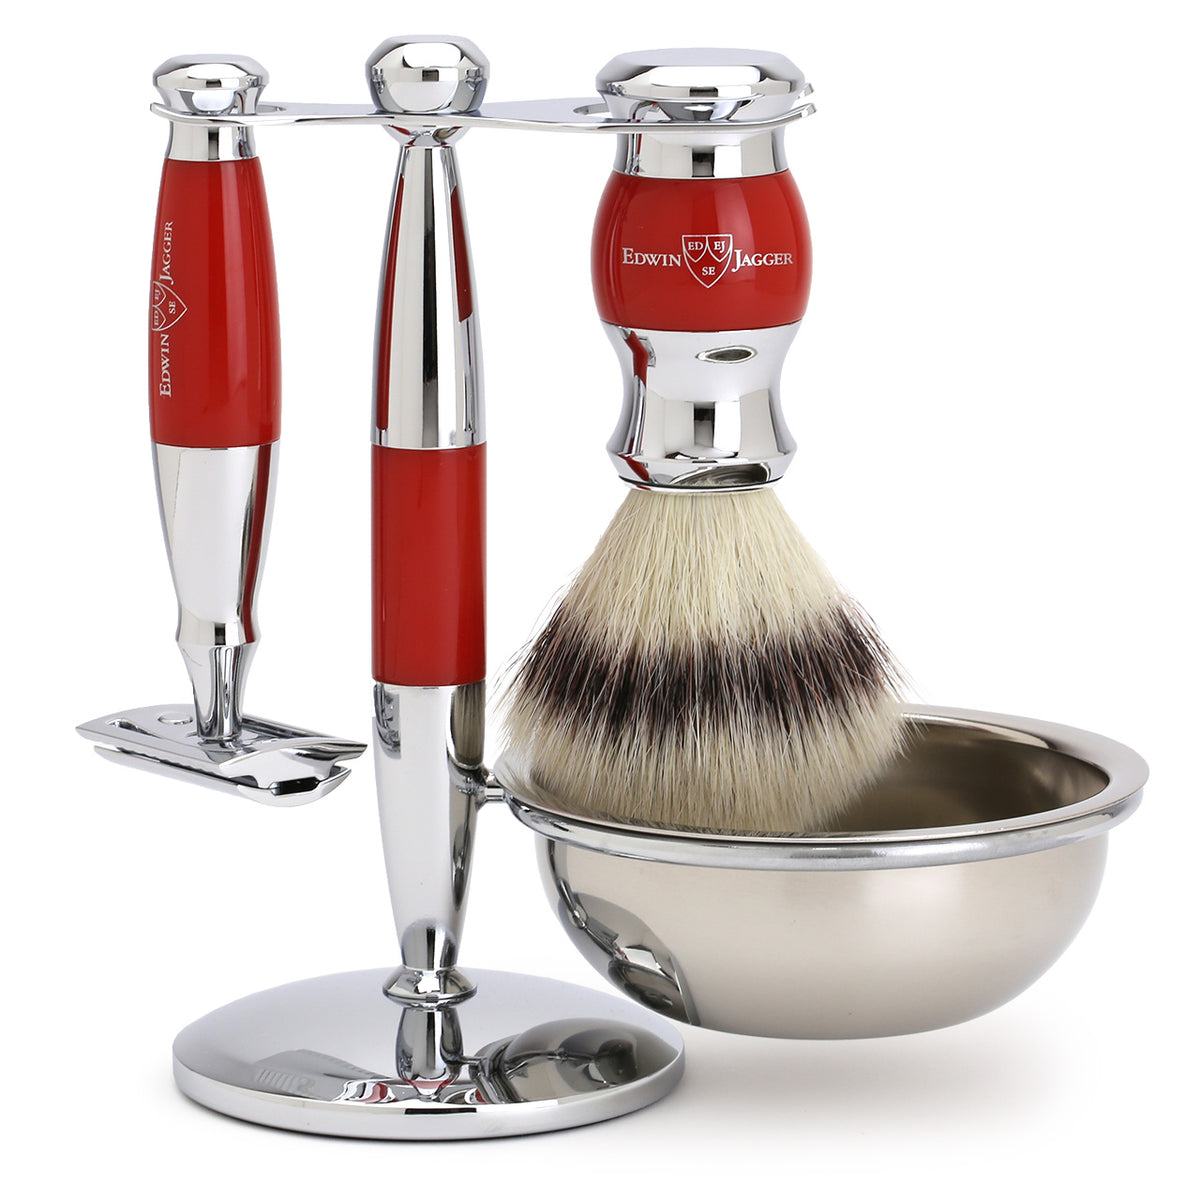 Edwin Jagger Shaving Set with Shaving Brush, Safety Razor, Stand and Soap Bowl - Red